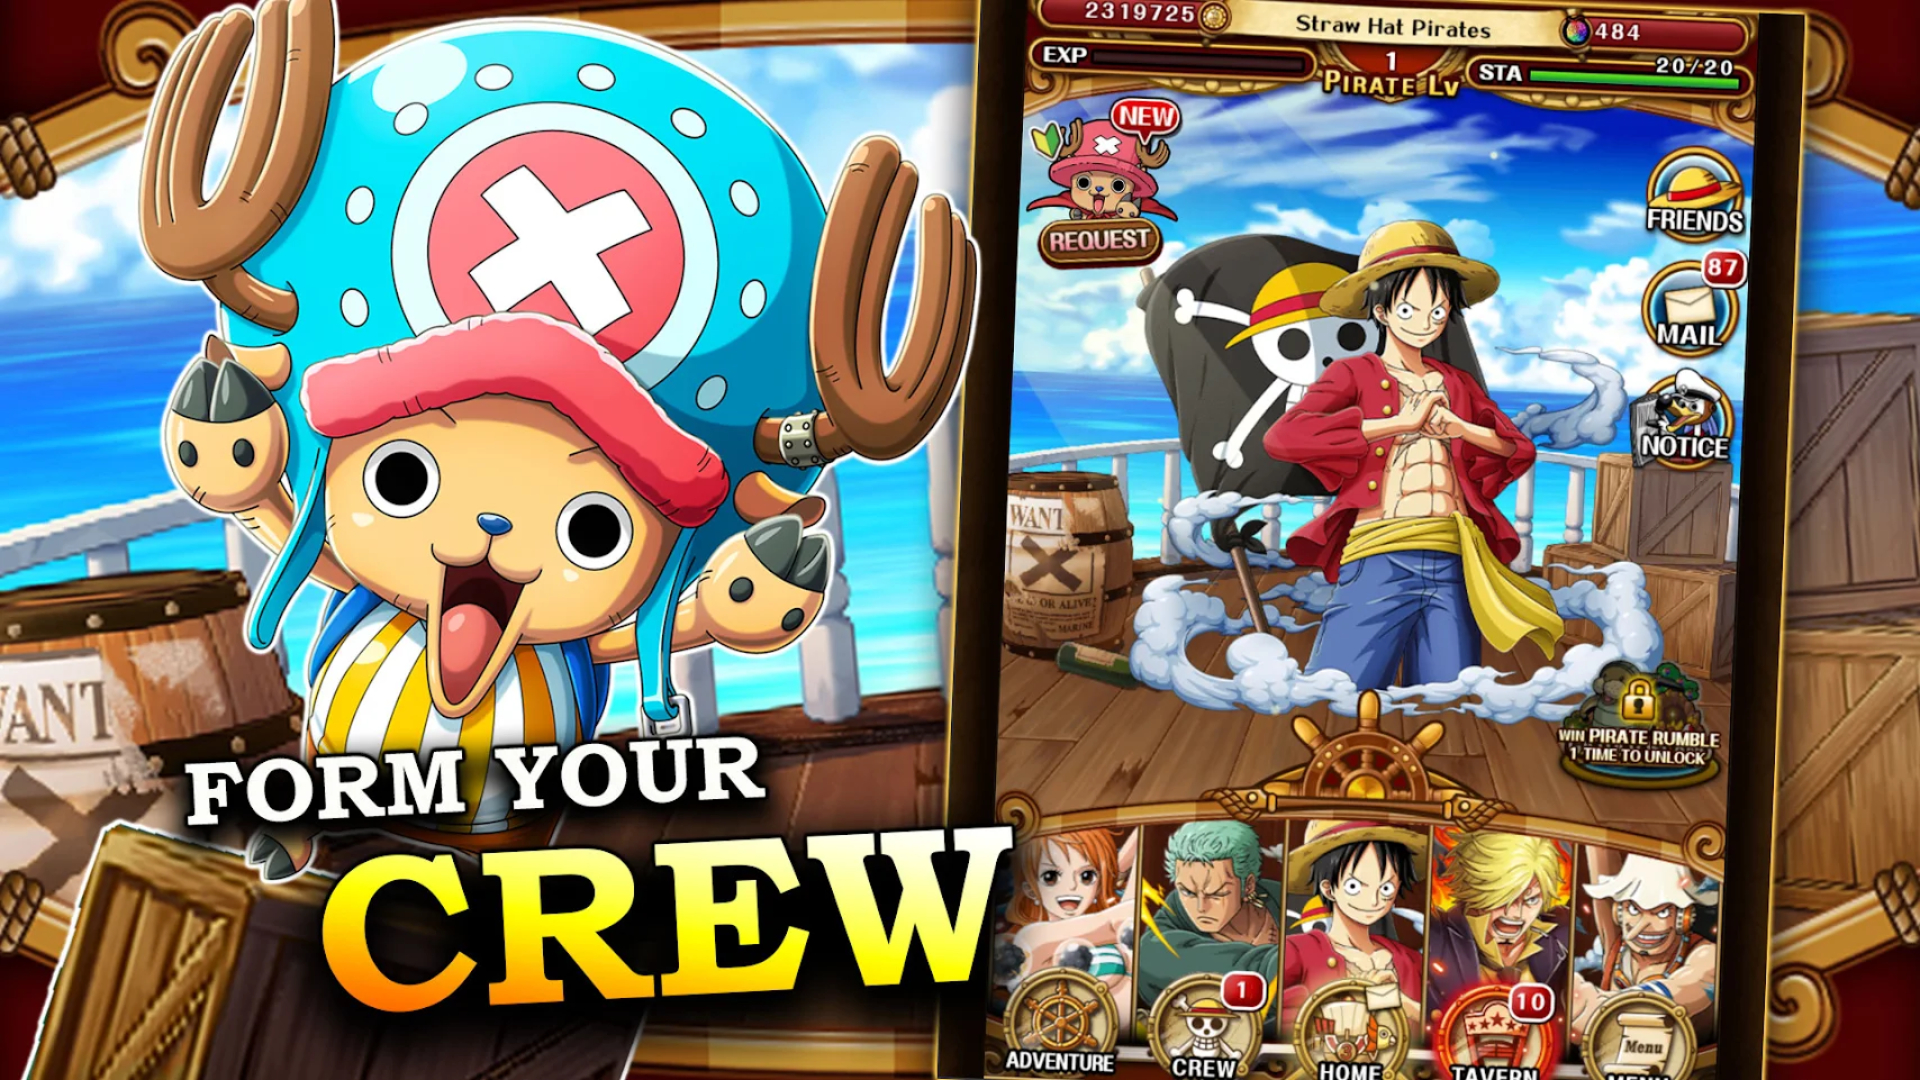 Best anime games: One Piece Treasure Cruise. Image shows a selection of One Piece characters and the text 